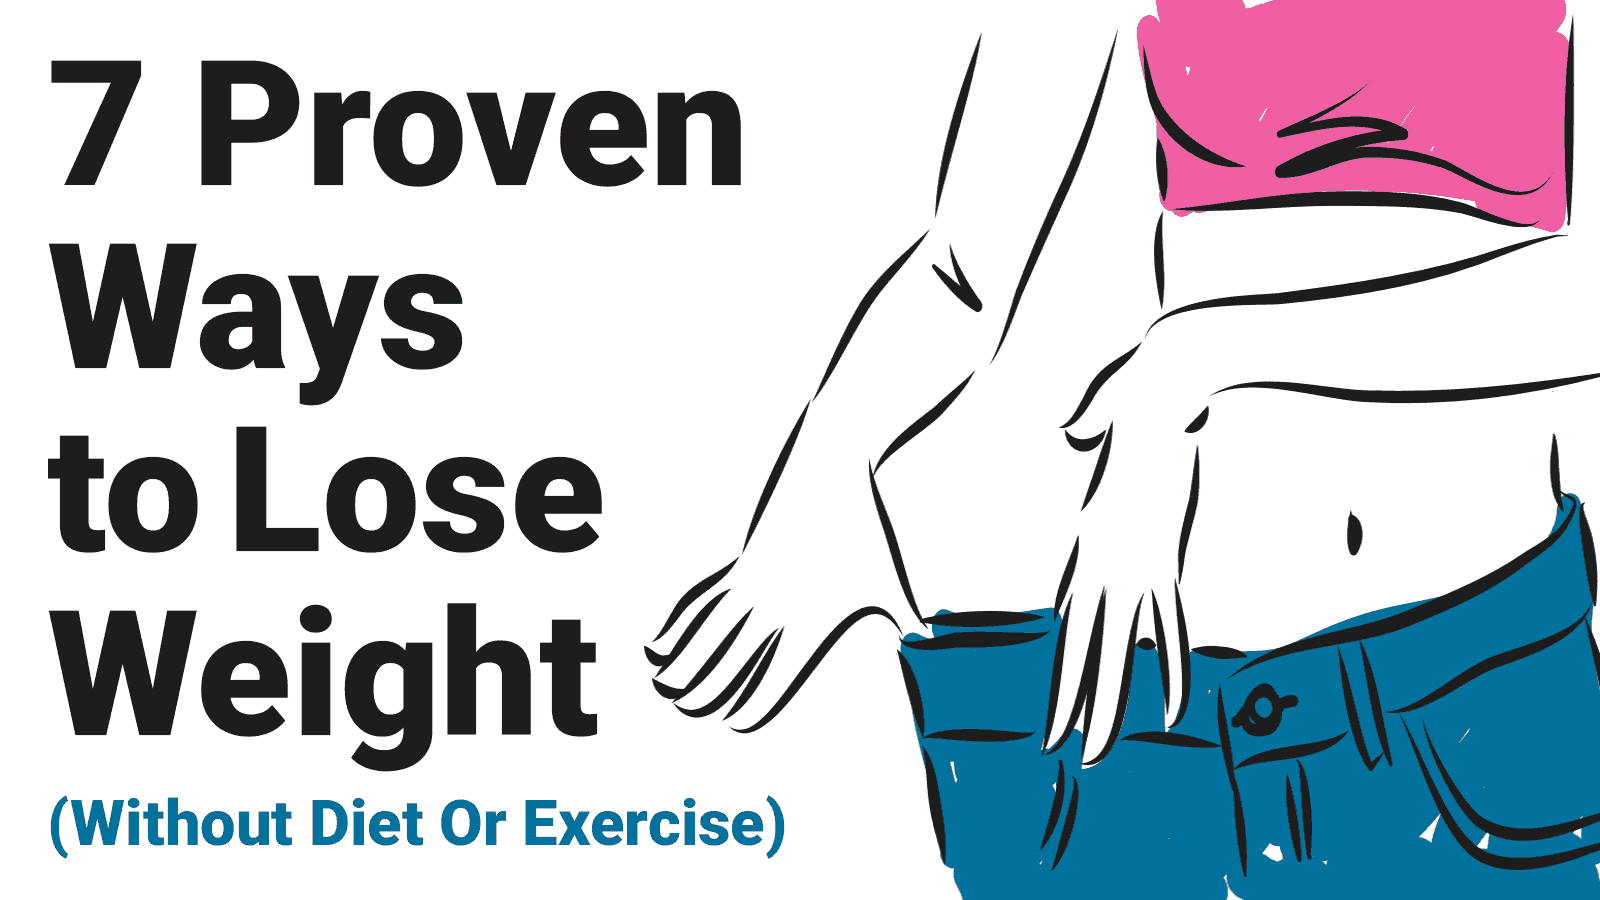 7 Proven Ways to Lose Weight (Without Diet or Exercise)